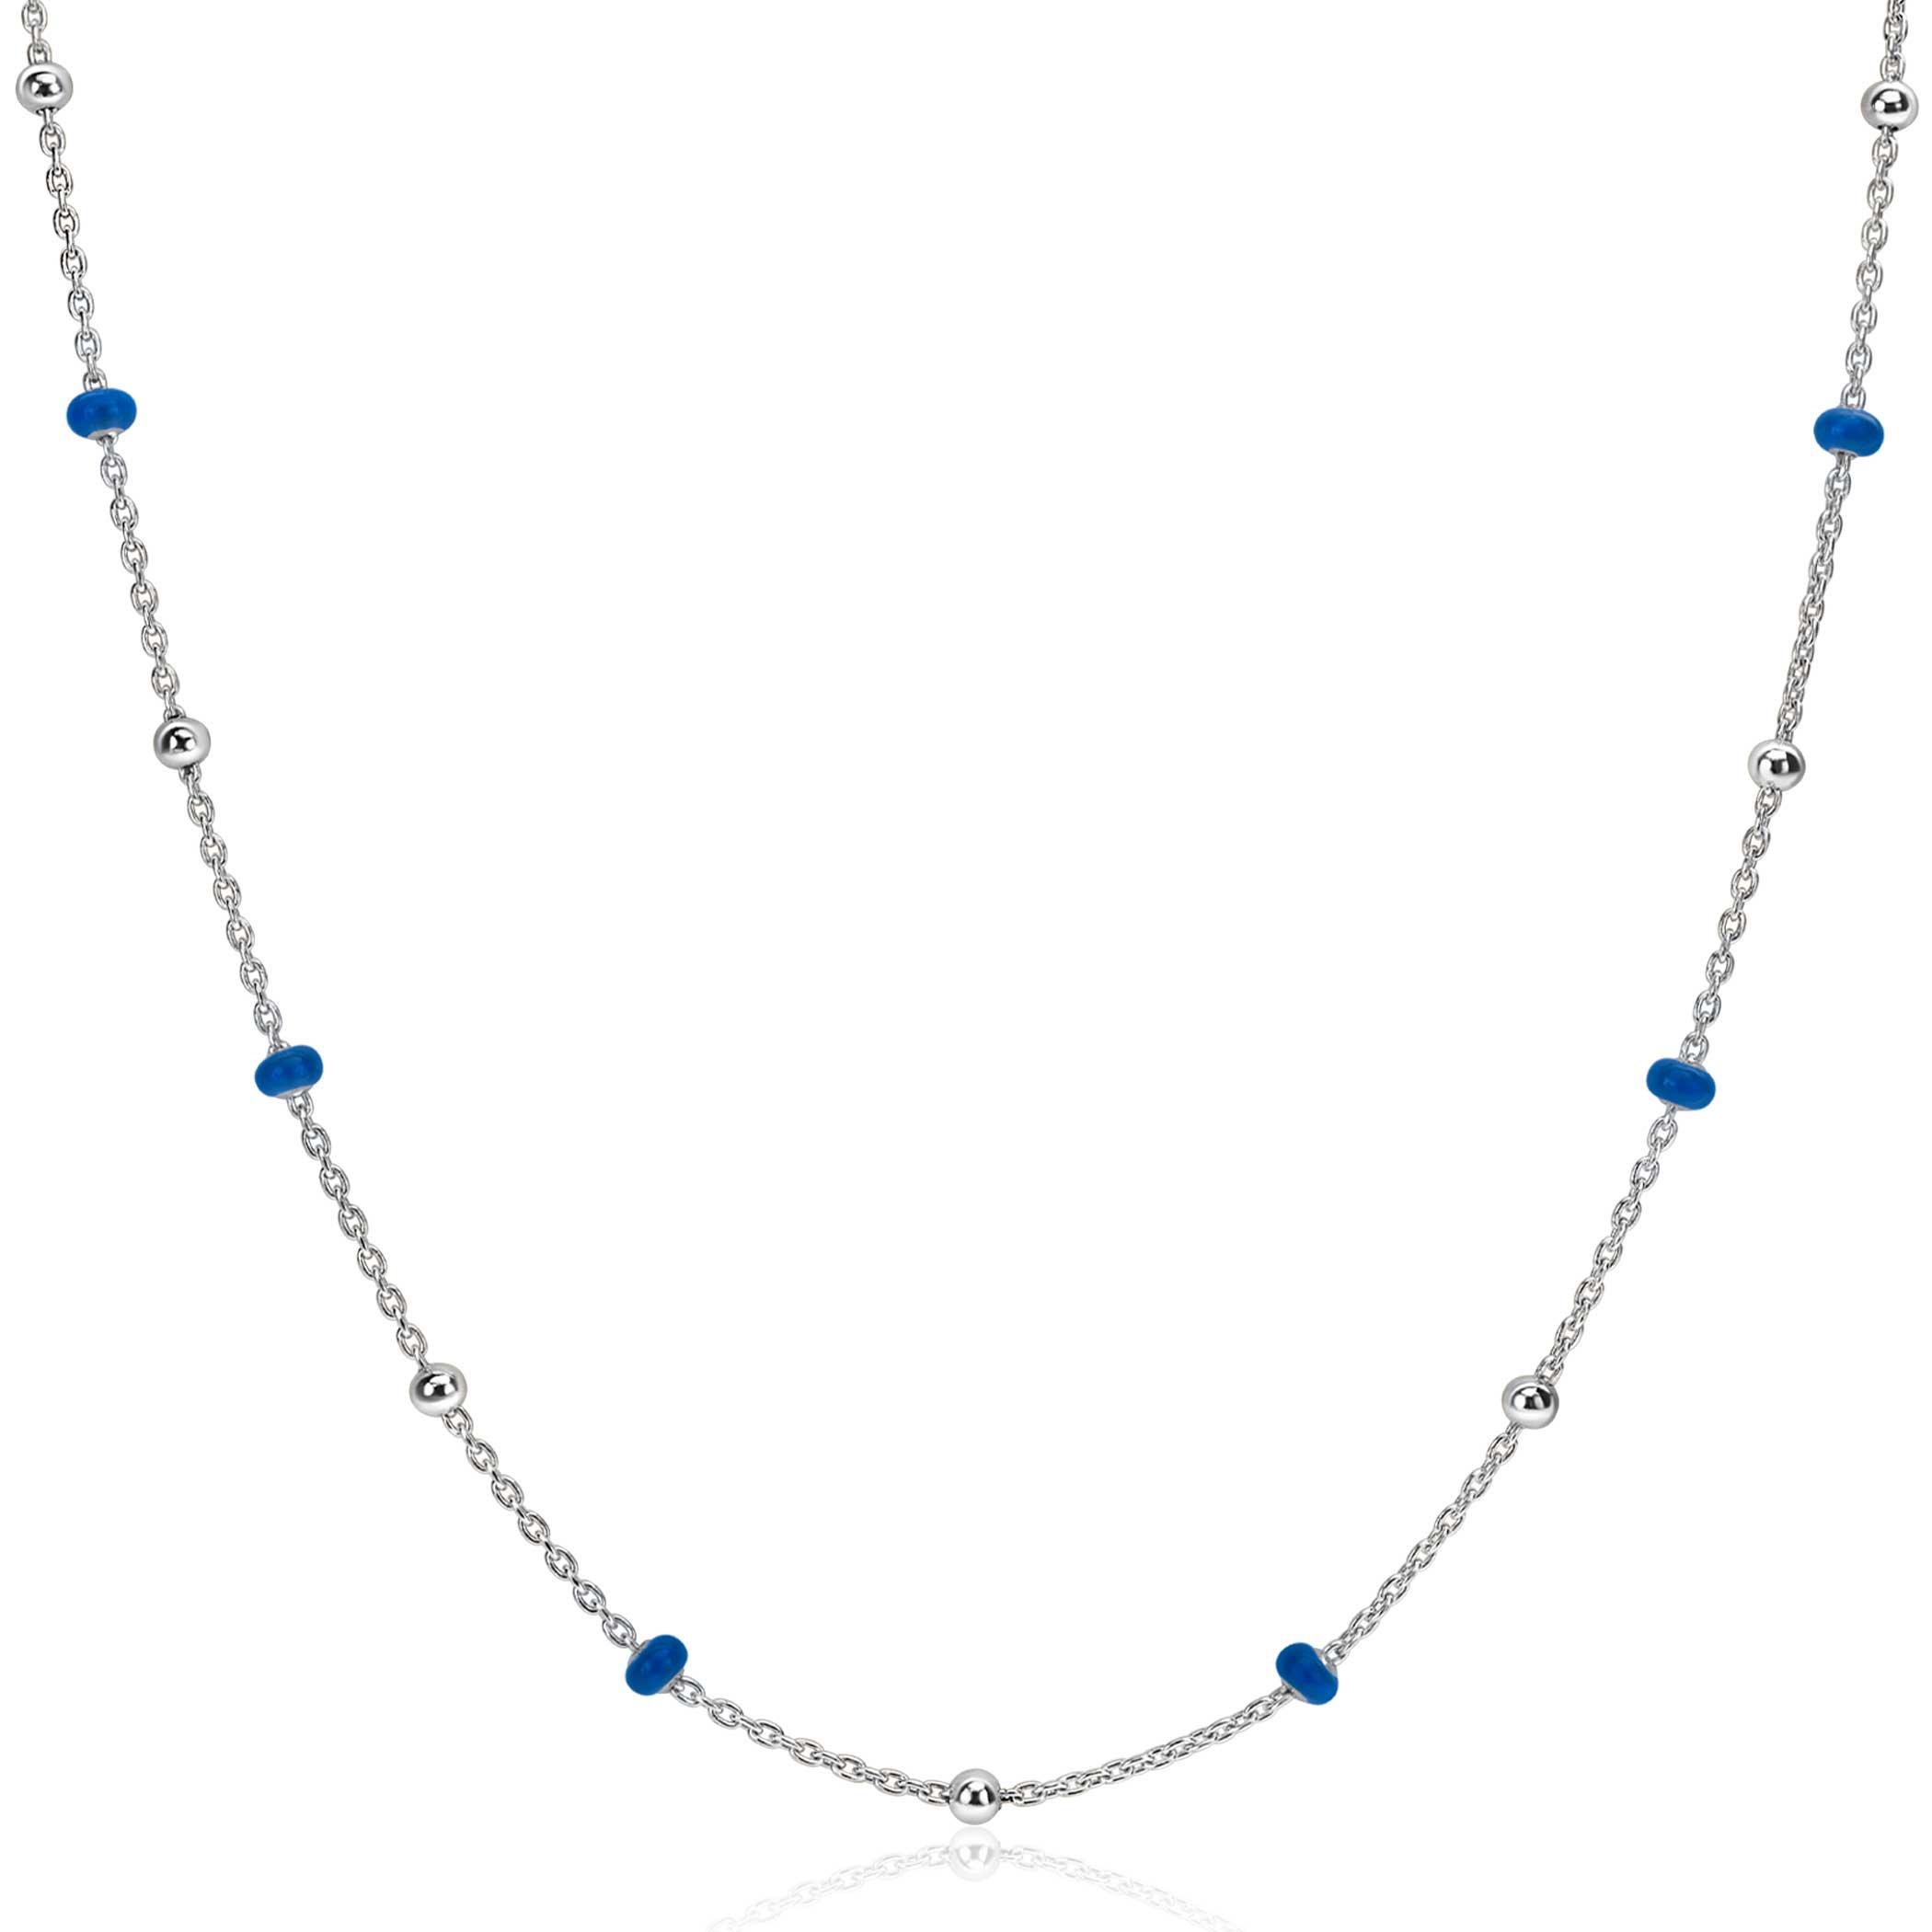 ZINZI Sterling Silver Fantasy Necklace with 13 Blue Donuts and Shiny Beads 42-45cm ZIC2511